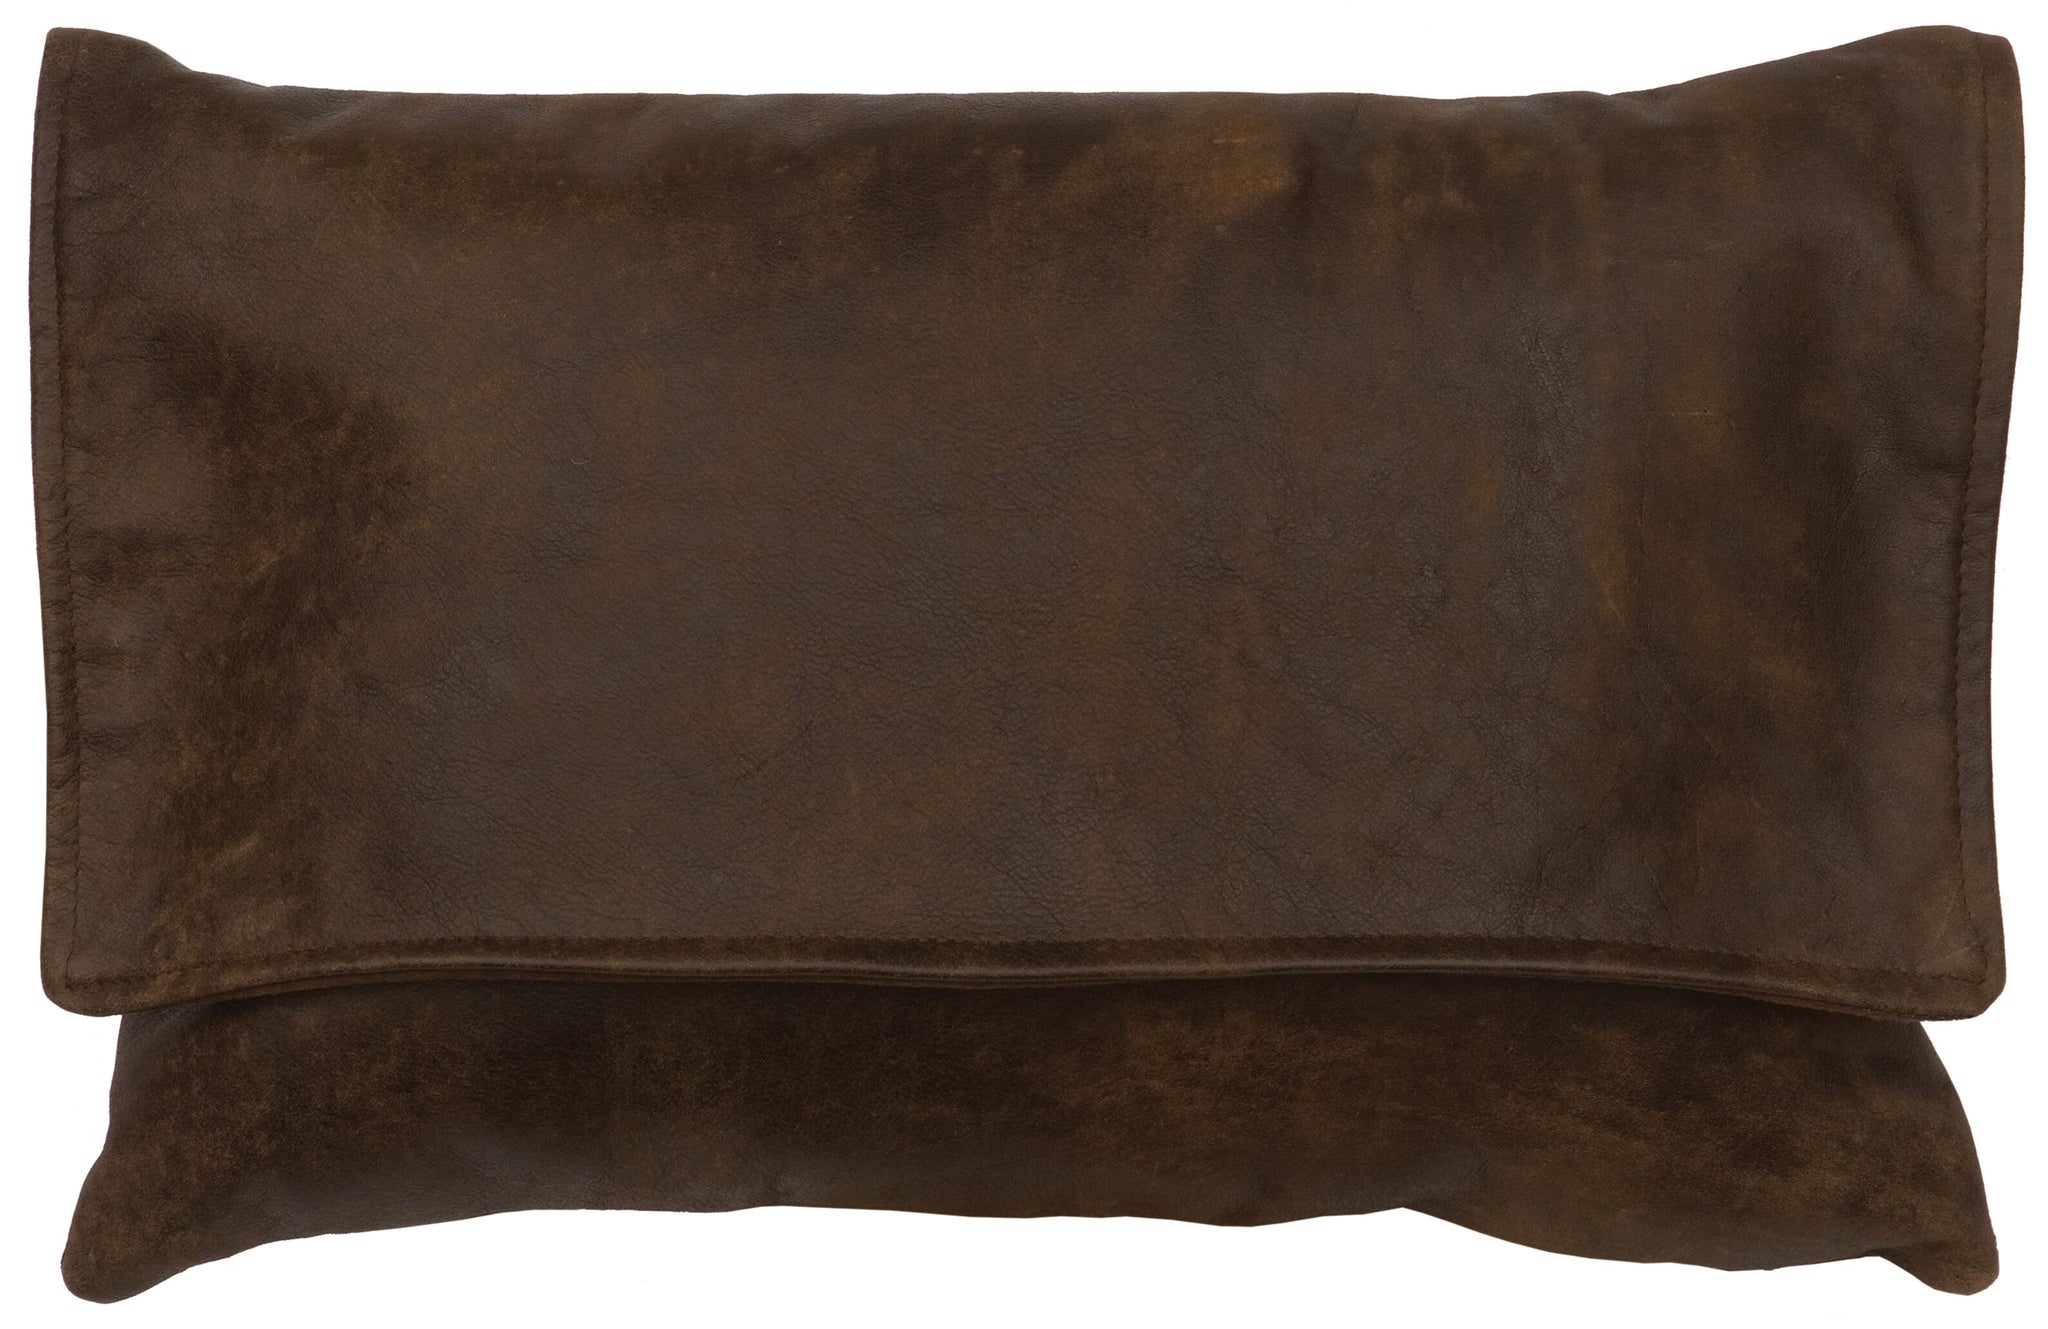 Leather Pillows Wooded River WD80204 - Unique Linens Online